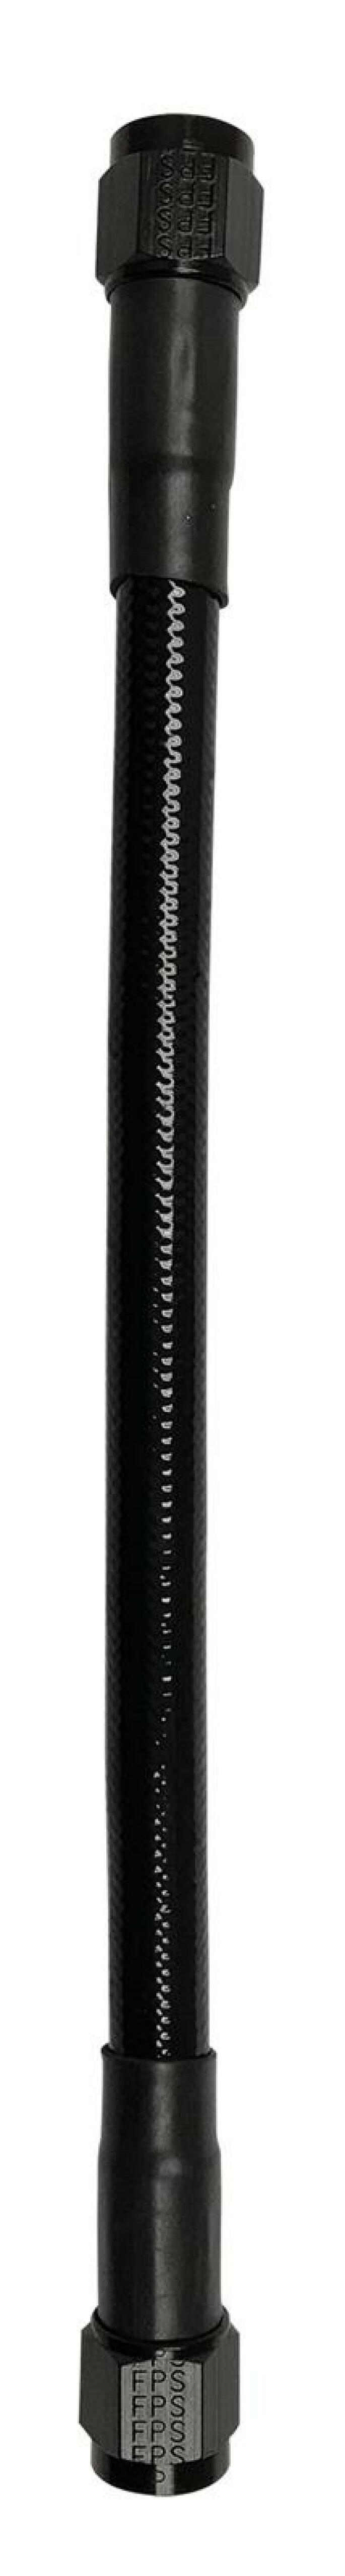 Fragola -10AN Ext Black PTFE Hose Assembly Straight x Straight 20in - 6029-1-1-20BL